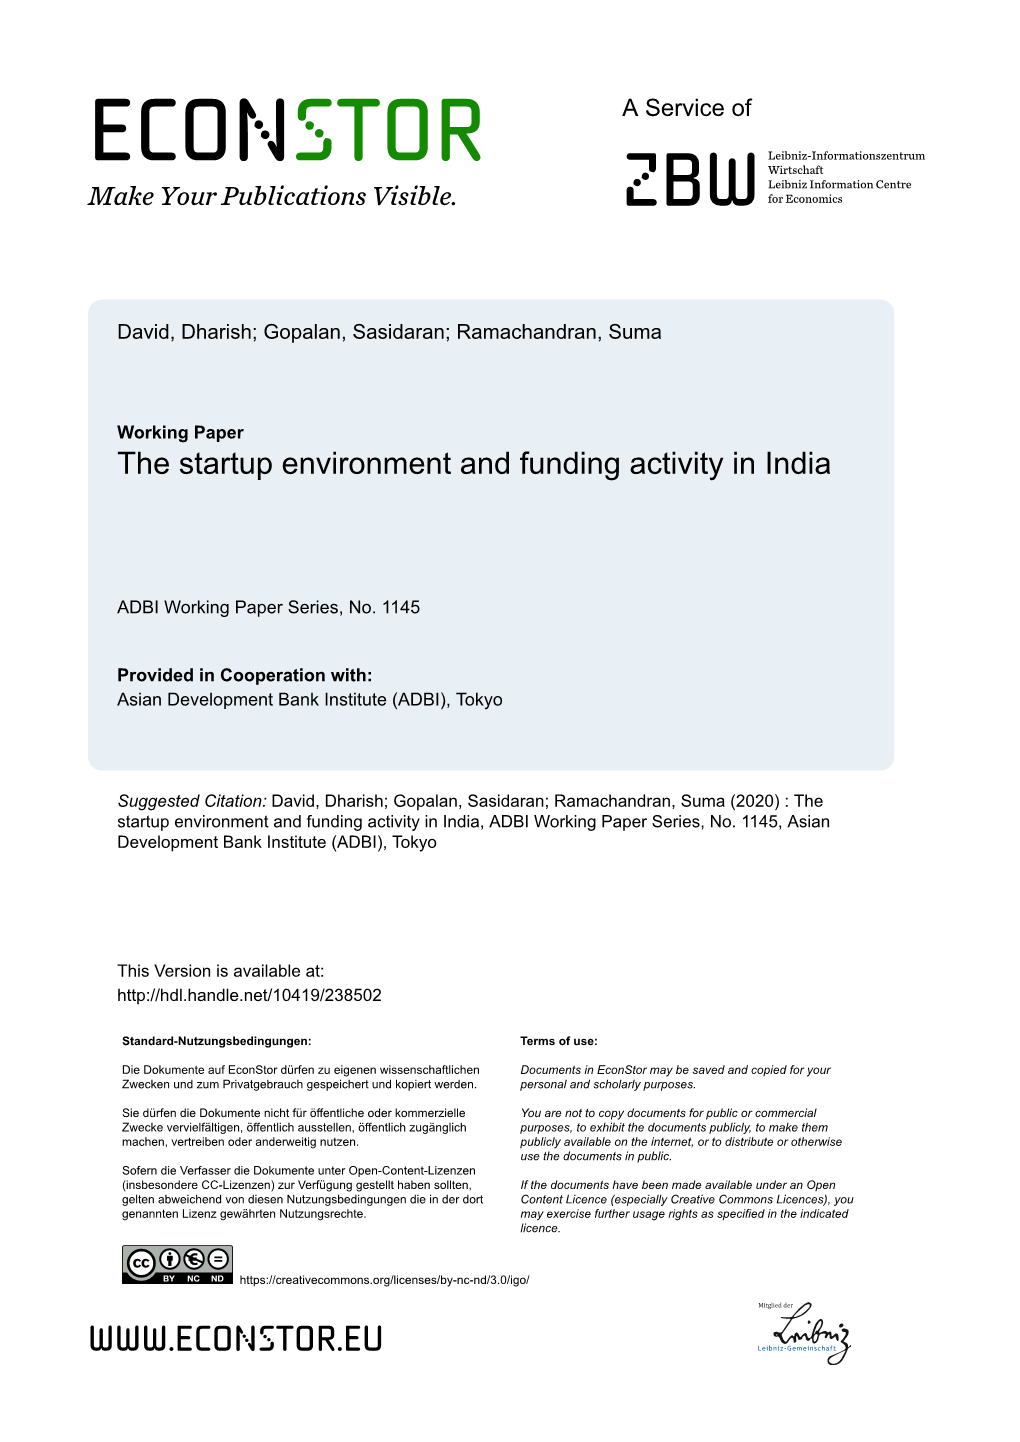 The Startup Environment and Funding Activity in India